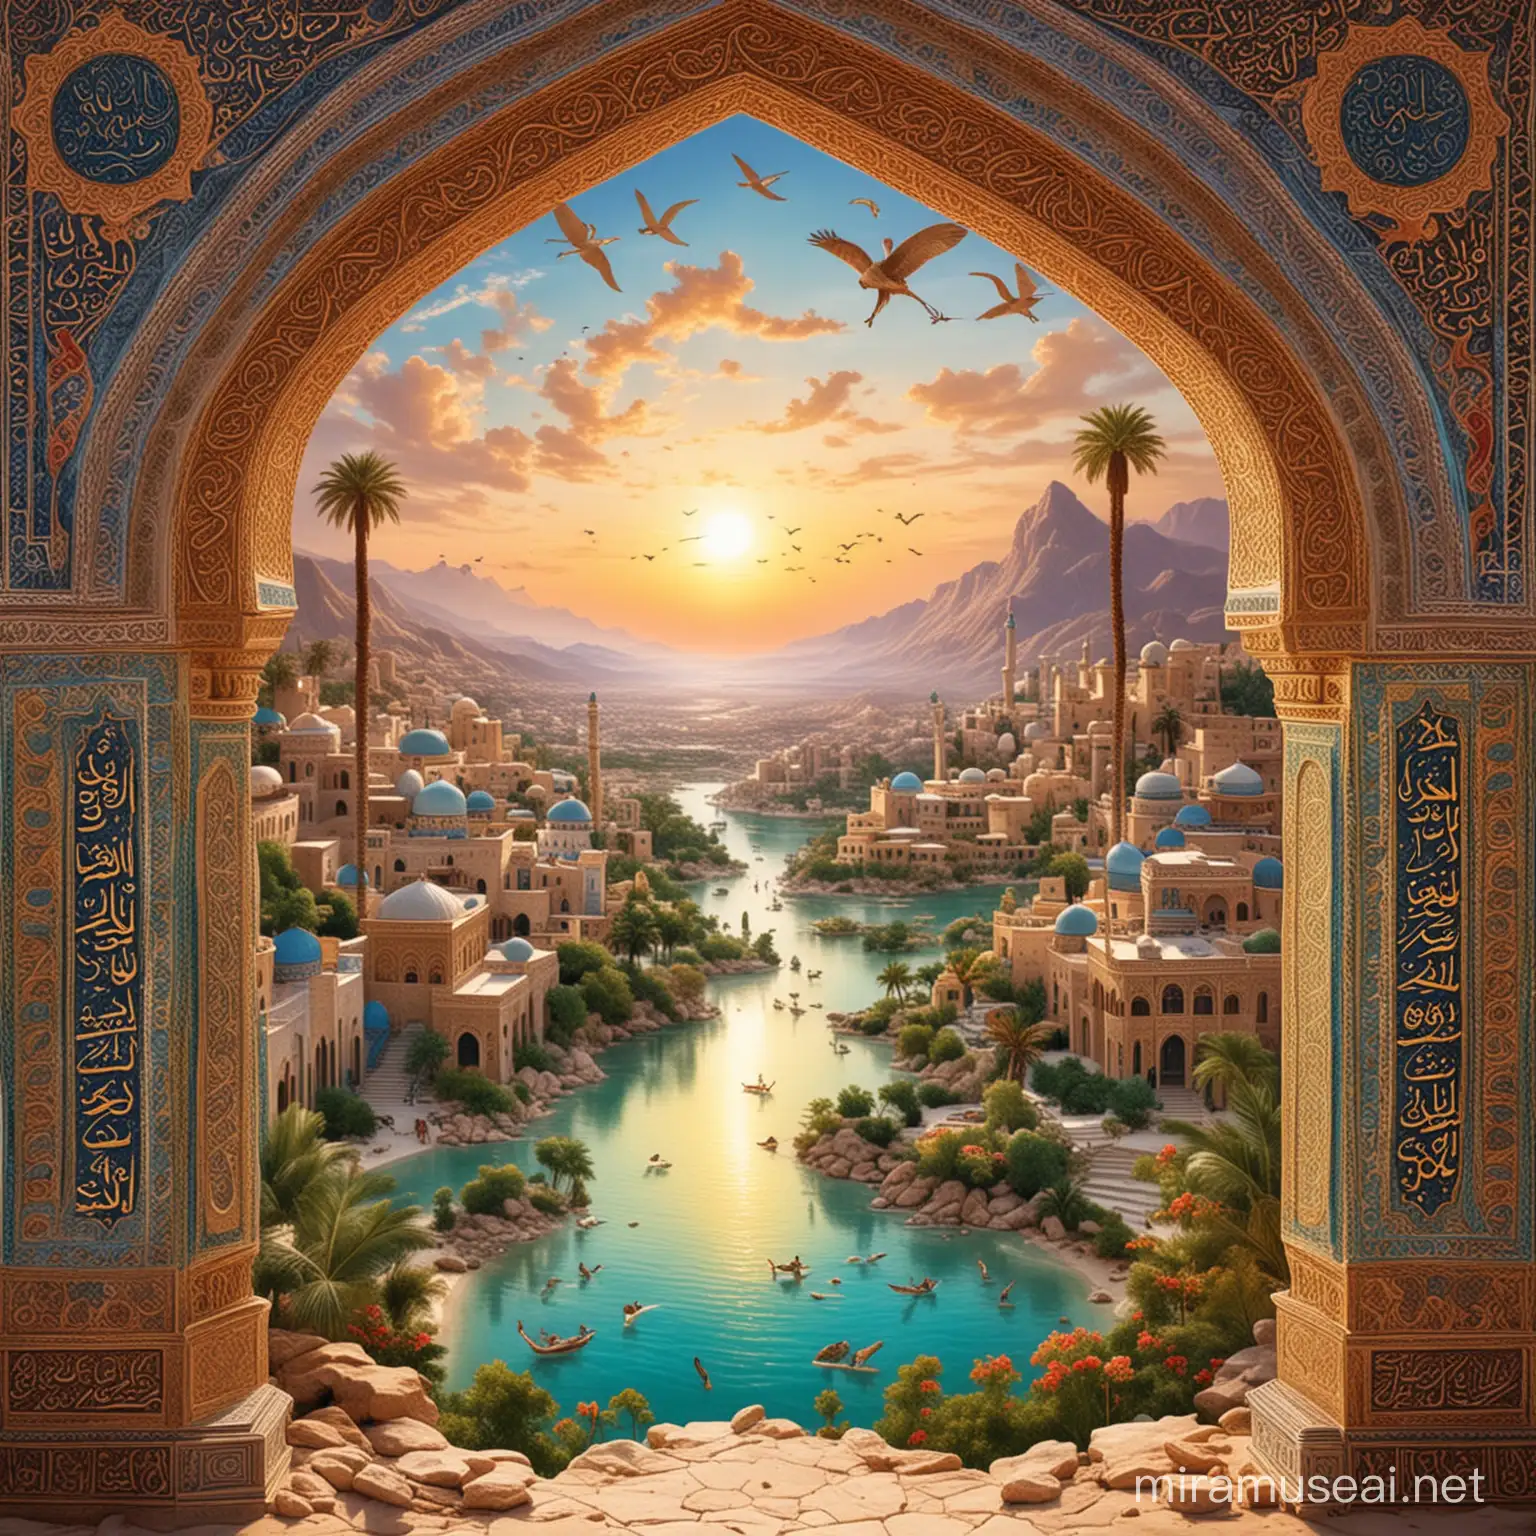 Heavenly Landscape A Vision from the Quran